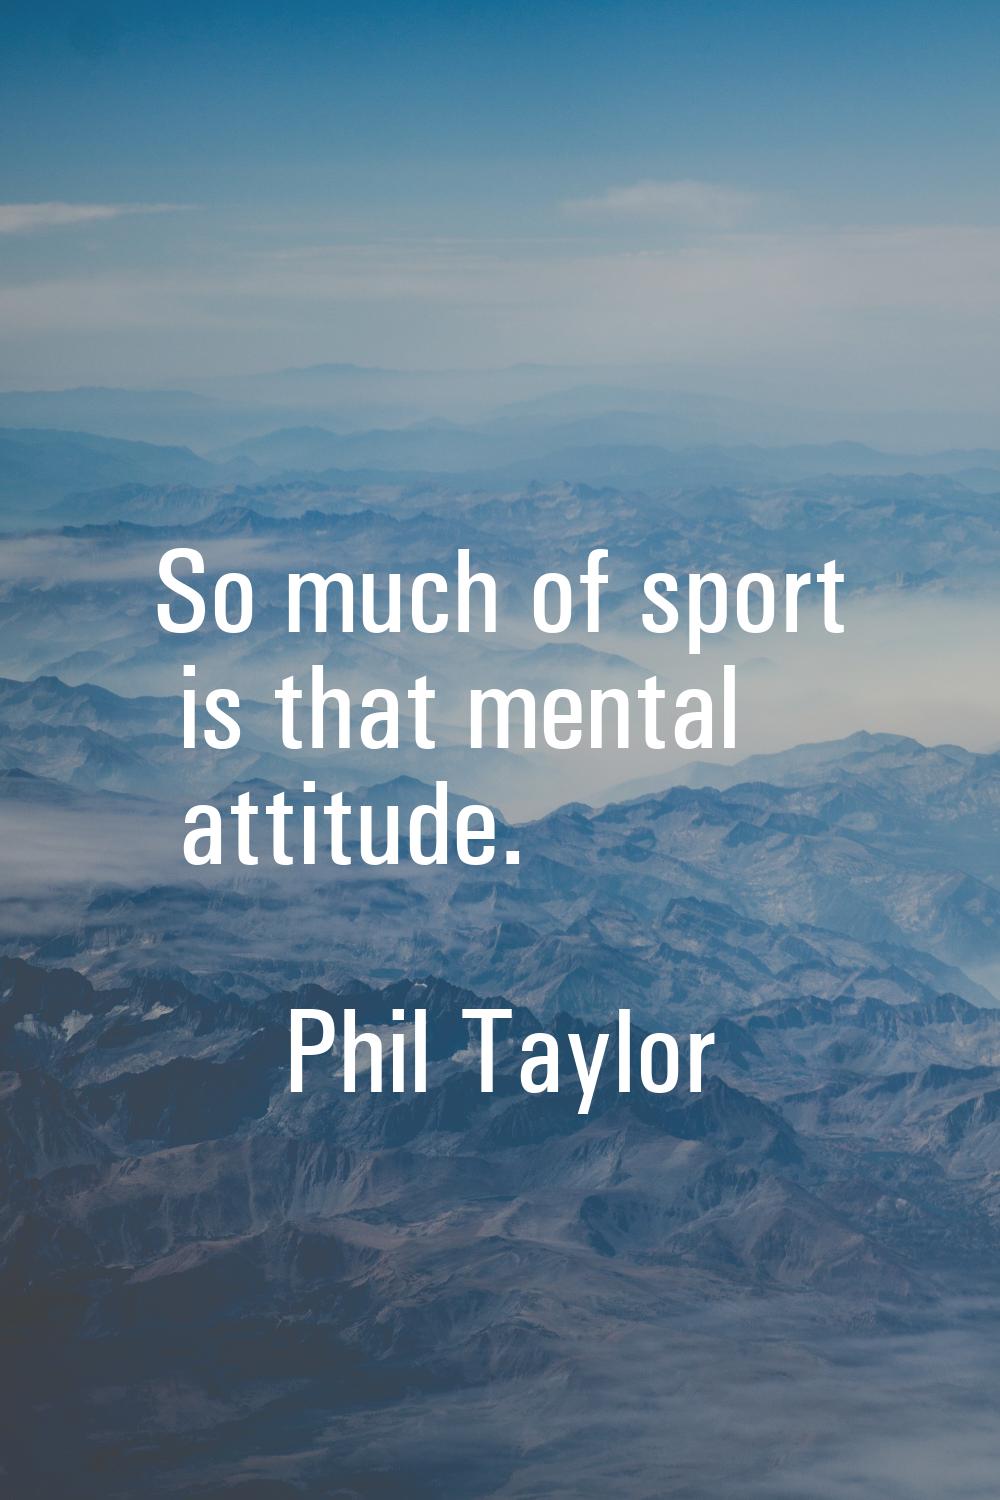 So much of sport is that mental attitude.